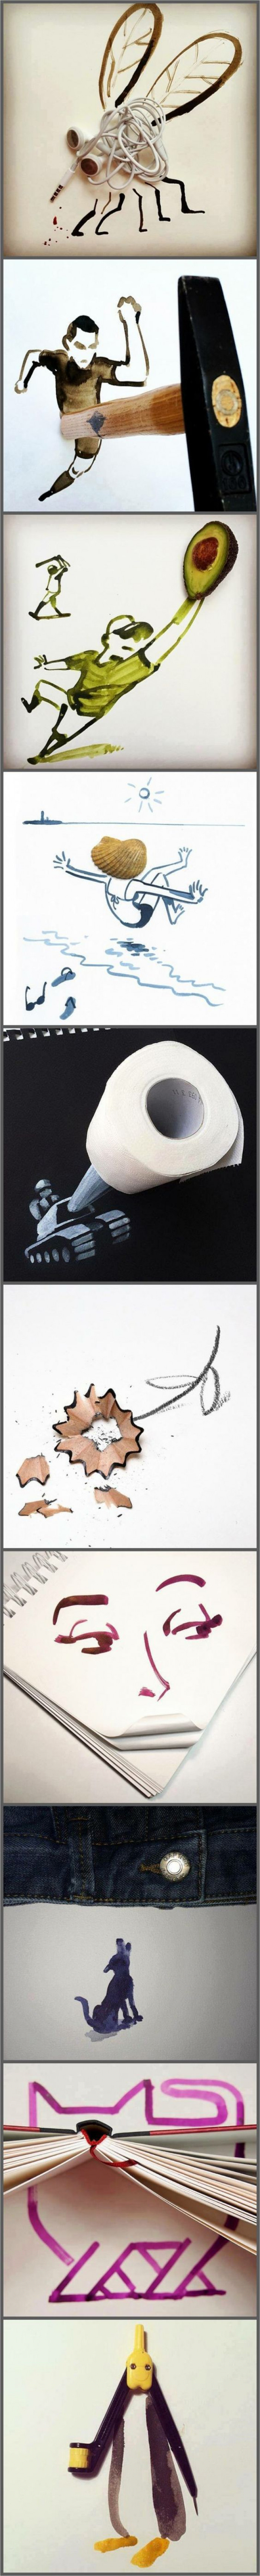 10 Drawings Combined With Everyday Objects That Will Make You LOL 